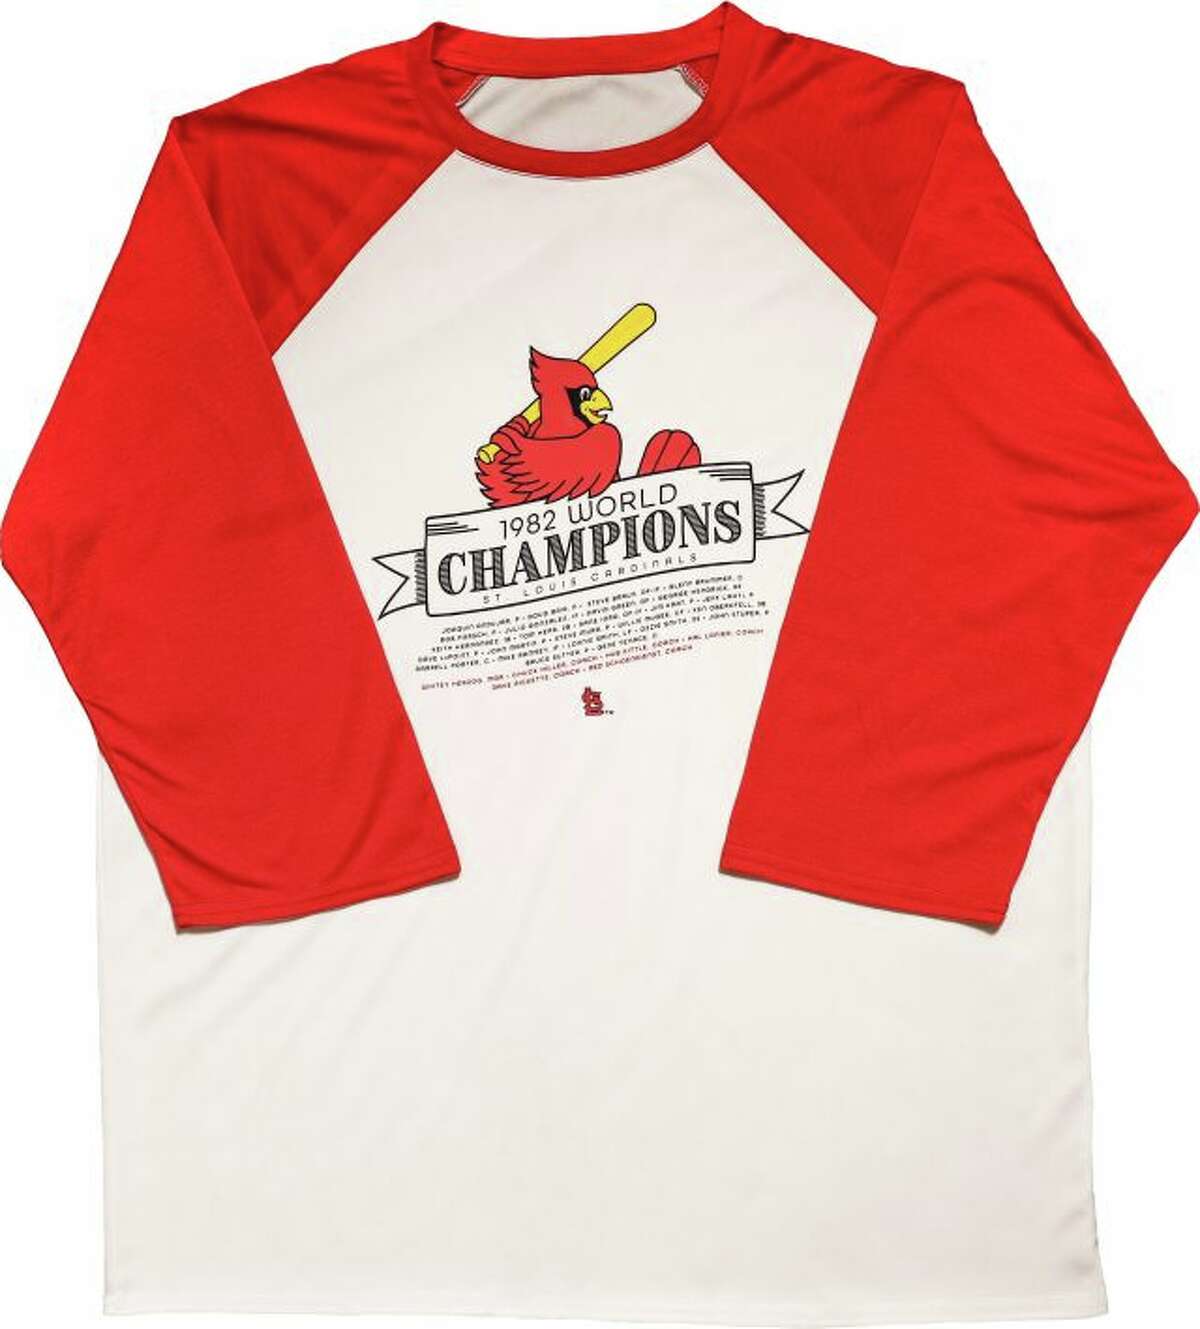 The St. Louis Cardinals will give away an adult 1982 baseball T-shirt May 27 against the Milwaukee Brewers. The shirt honors the 1982 World Series Championship team that will be celebrating its 40th anniversary.